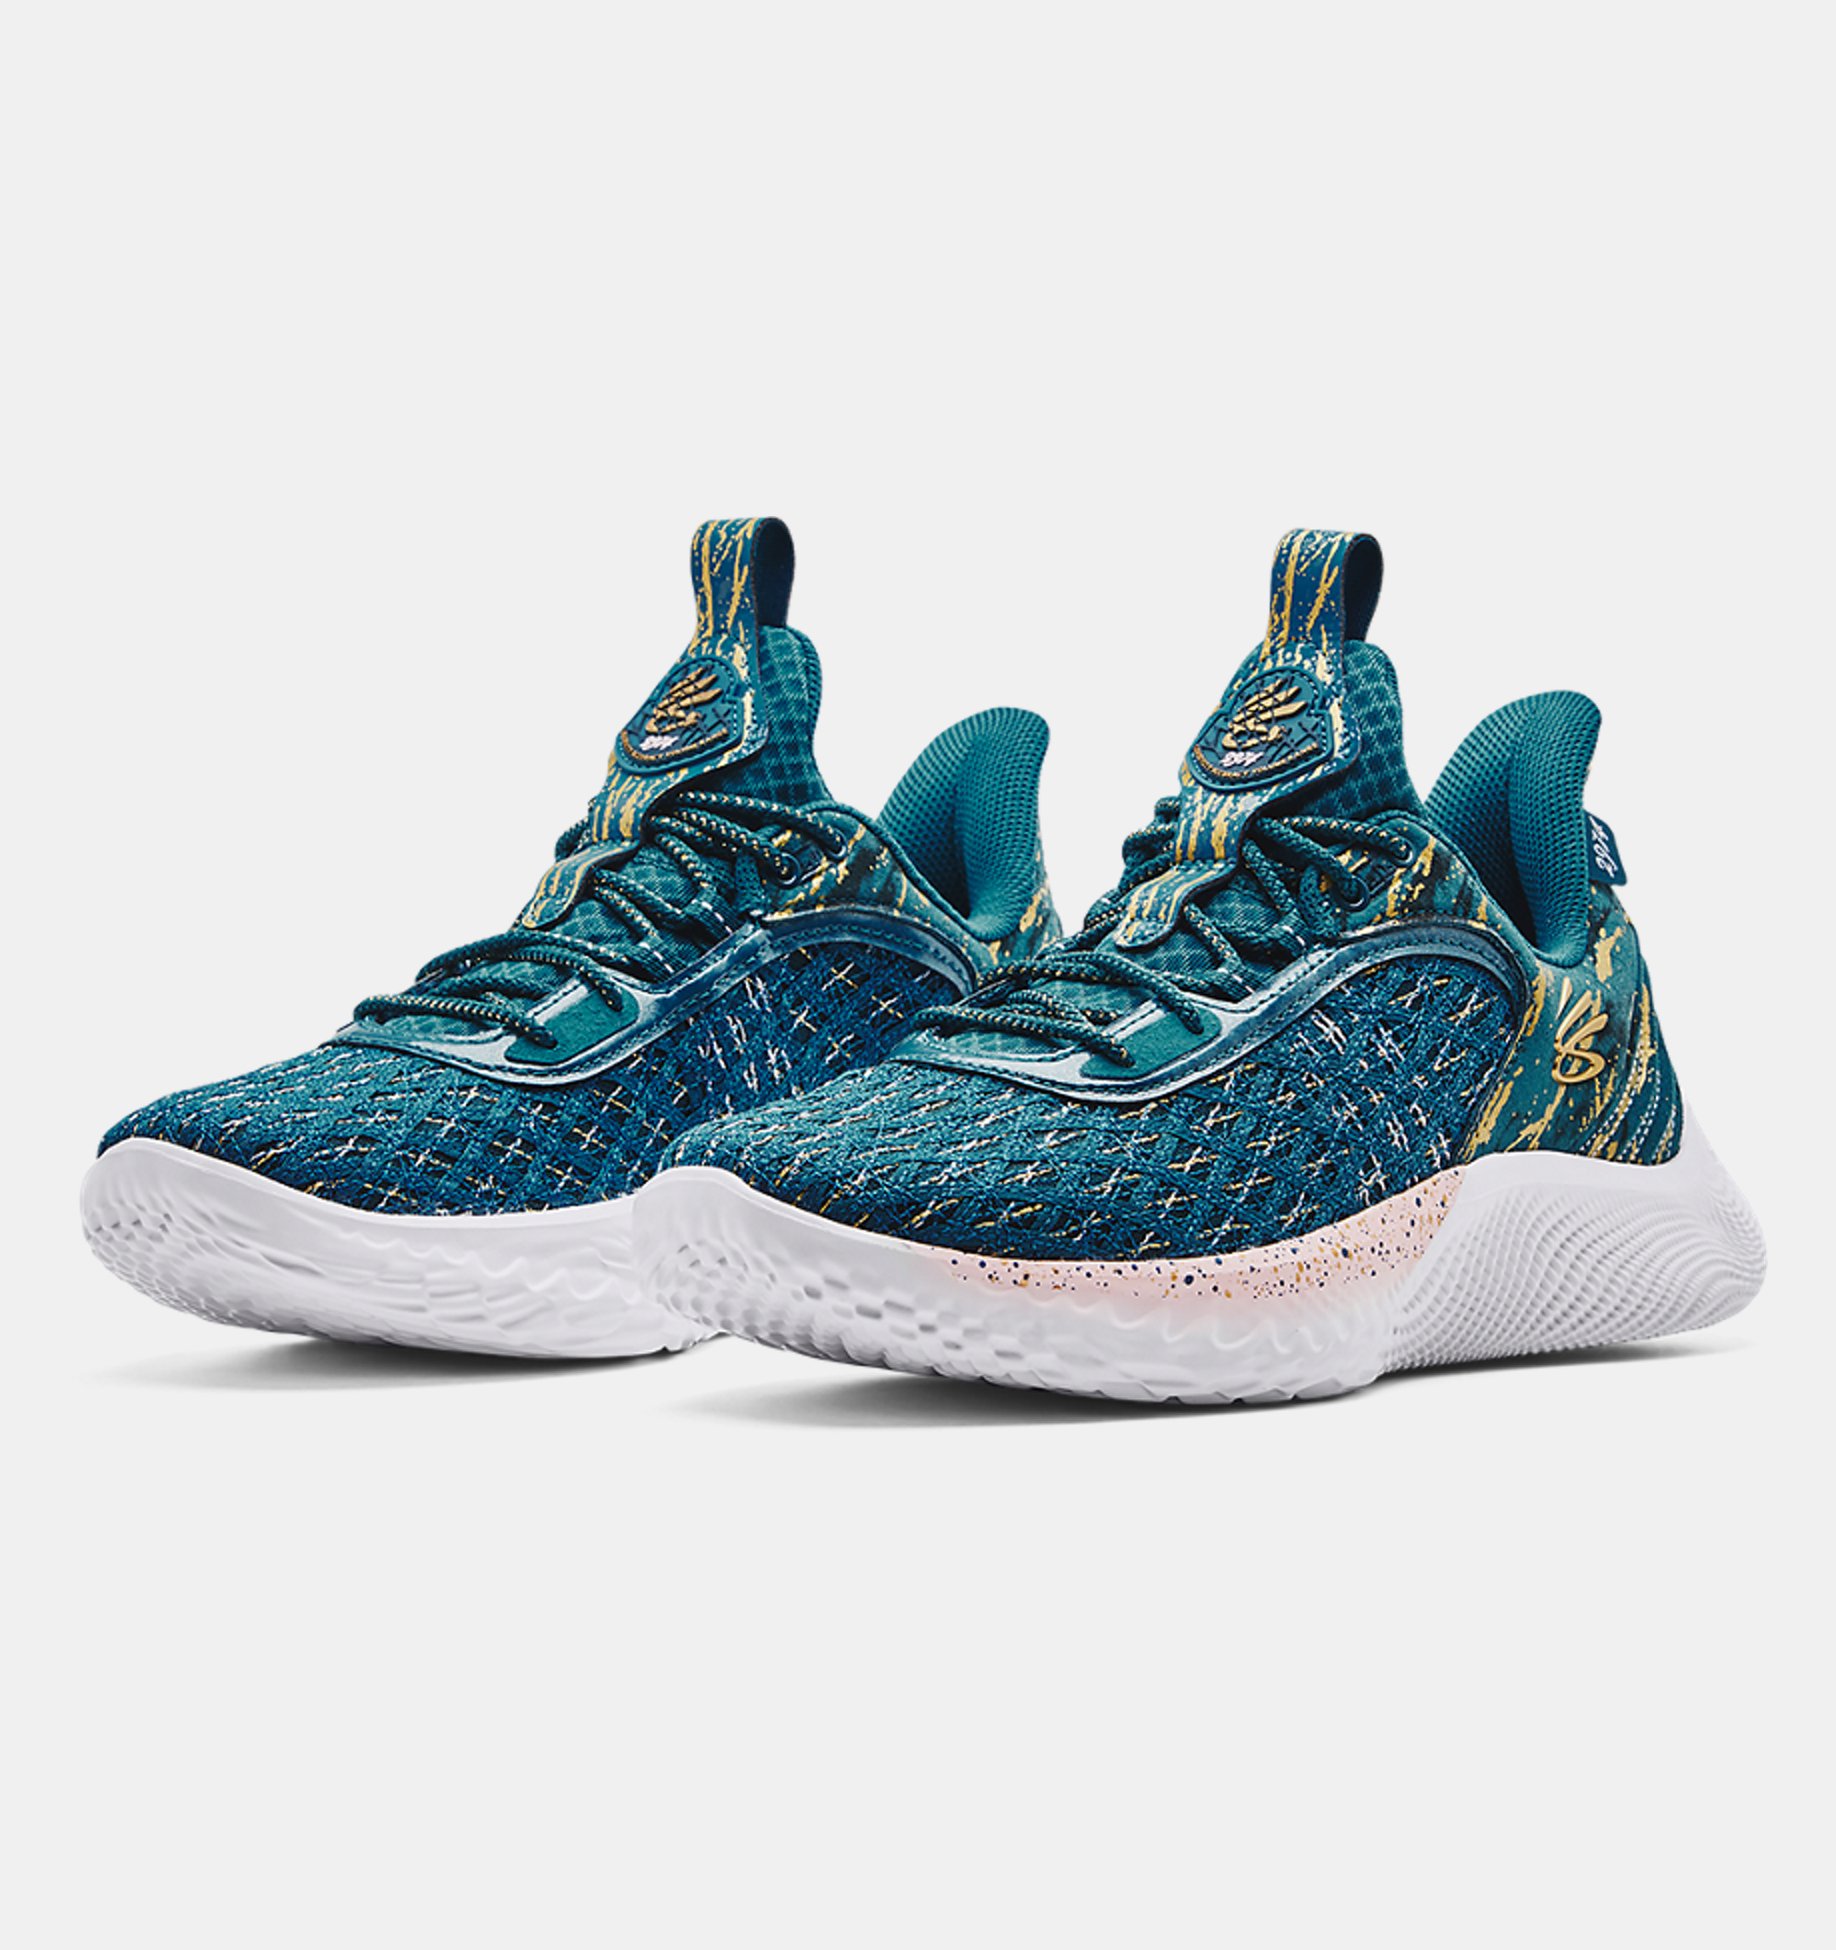 Unisex Curry Flow 9 '2974' Basketball Shoes | Under Armour